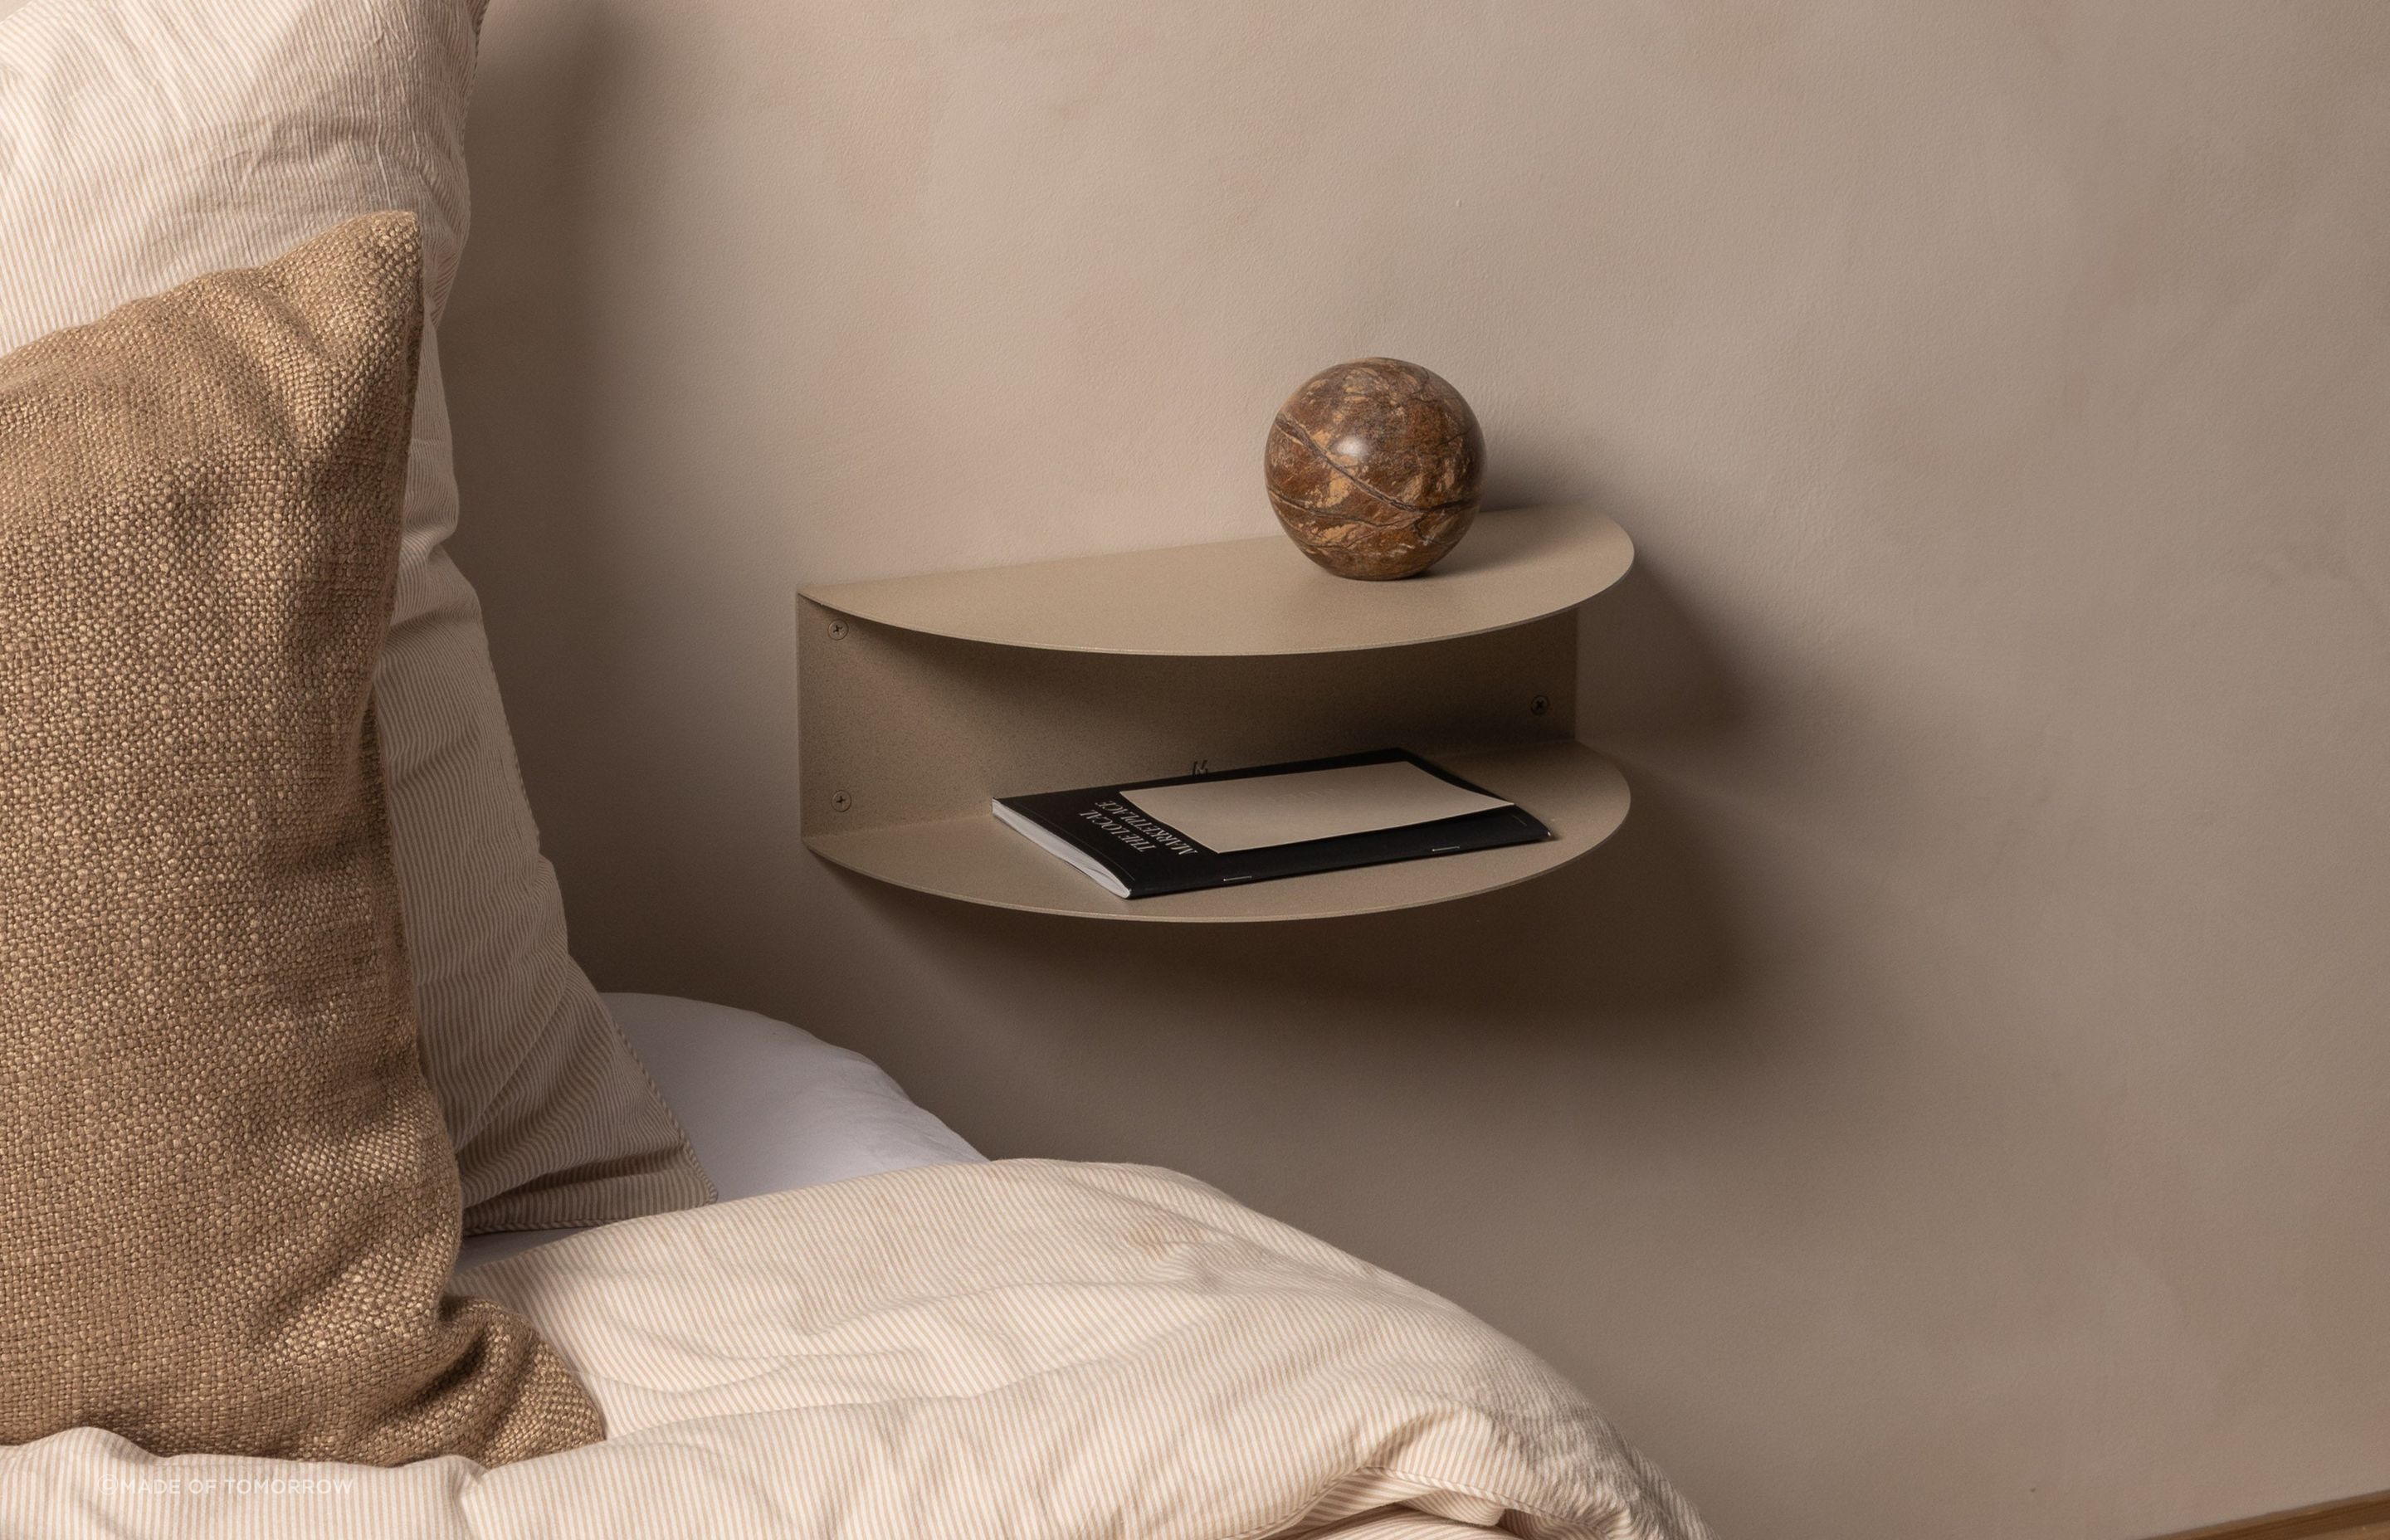 The space-saving and stylish FOLD bedside table that gracefully floats at your bedside.